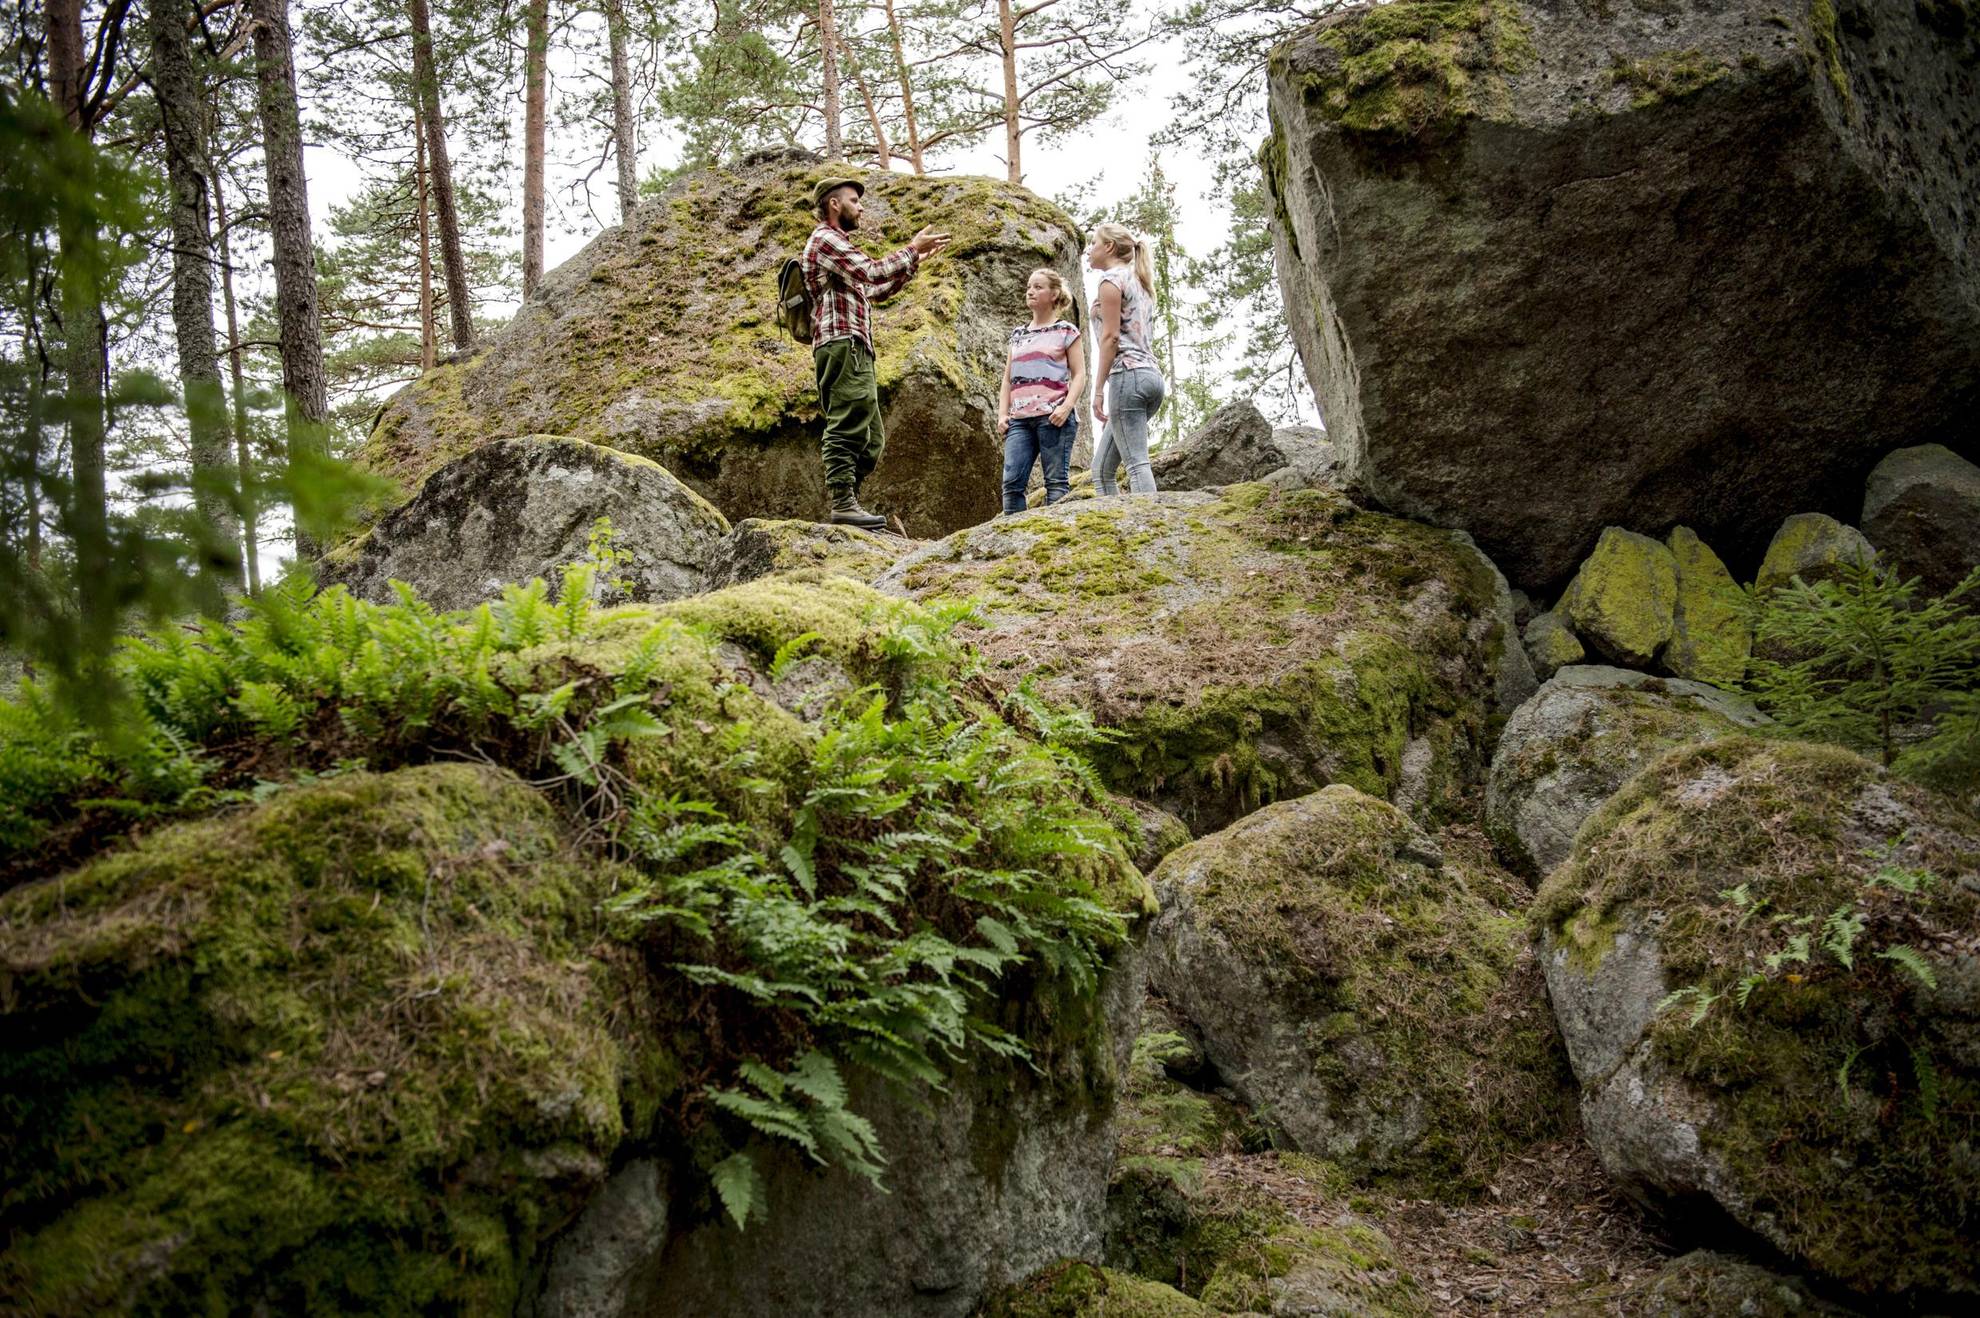 Two women are listening to a guide while standing in a forest.